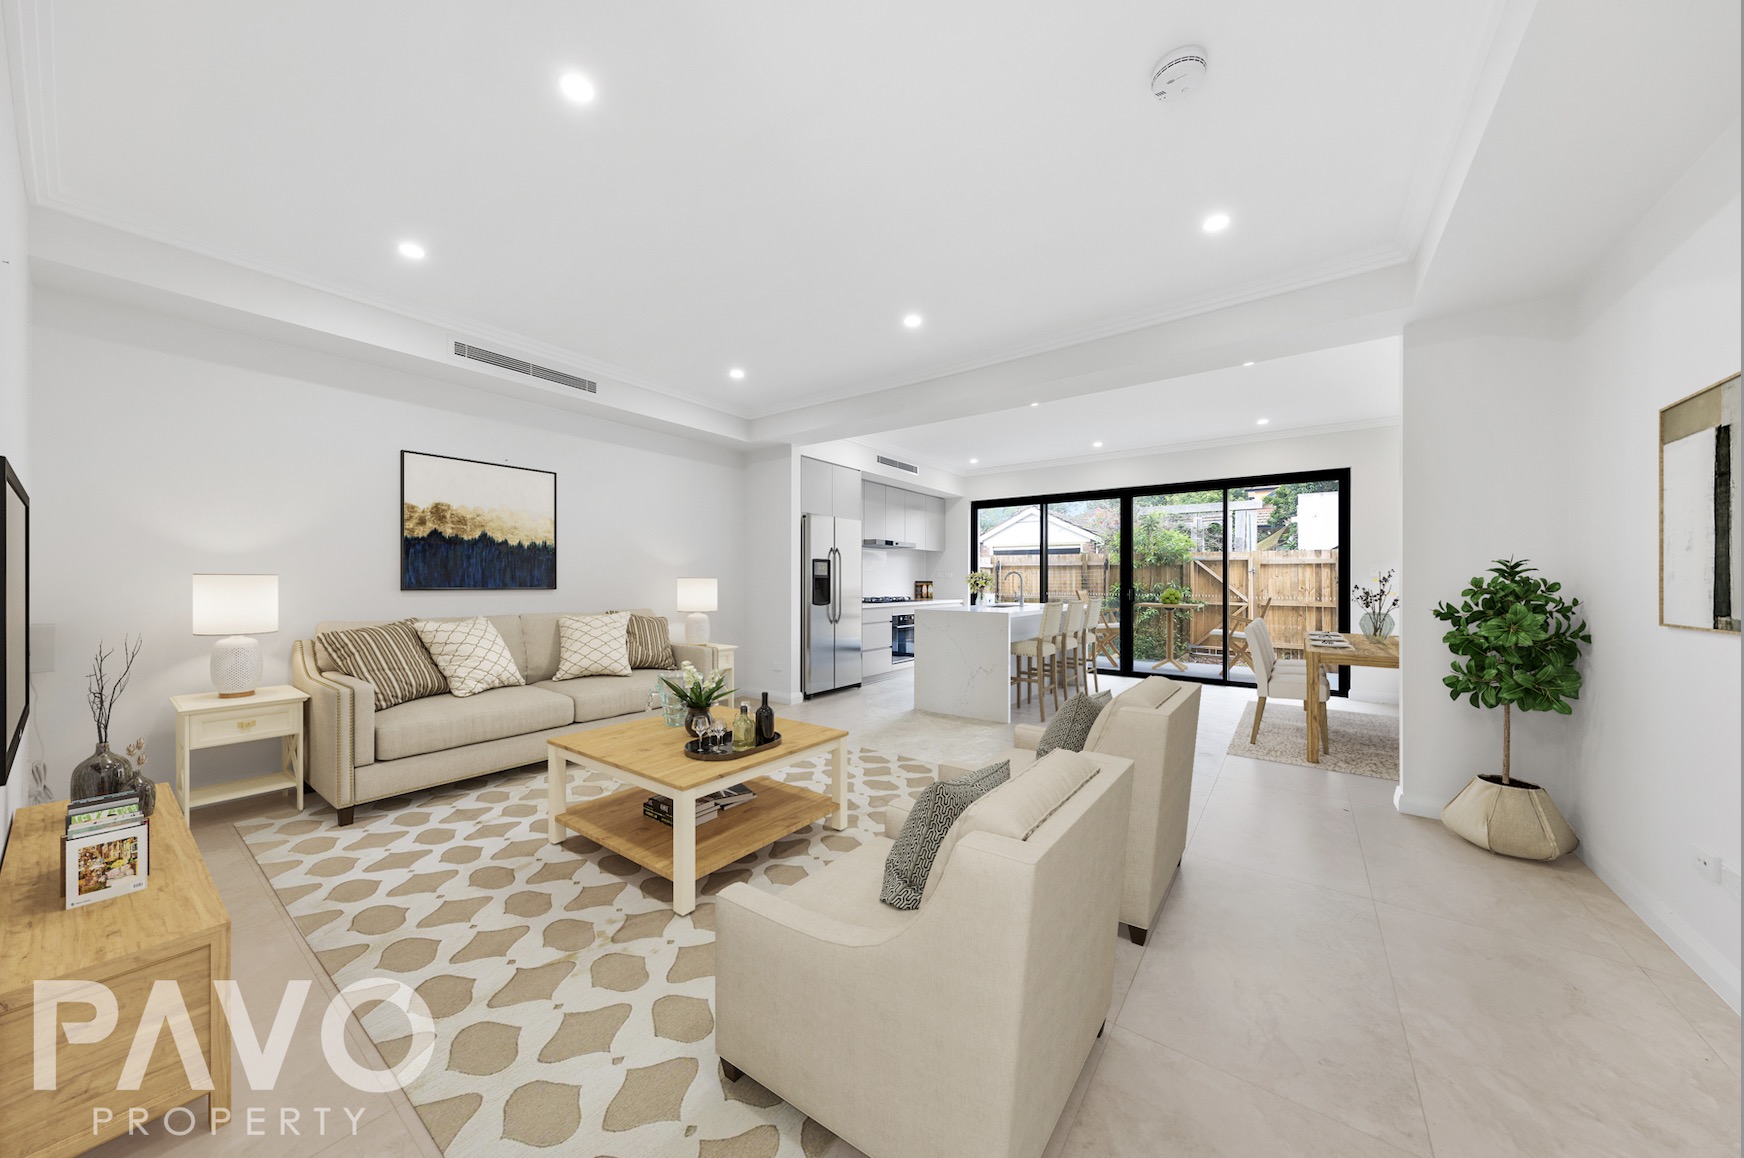 Burwood, New South Wales 2134, 4 Bedrooms Bedrooms, ,3 BathroomsBathrooms,Townhouse,For Sale,1020